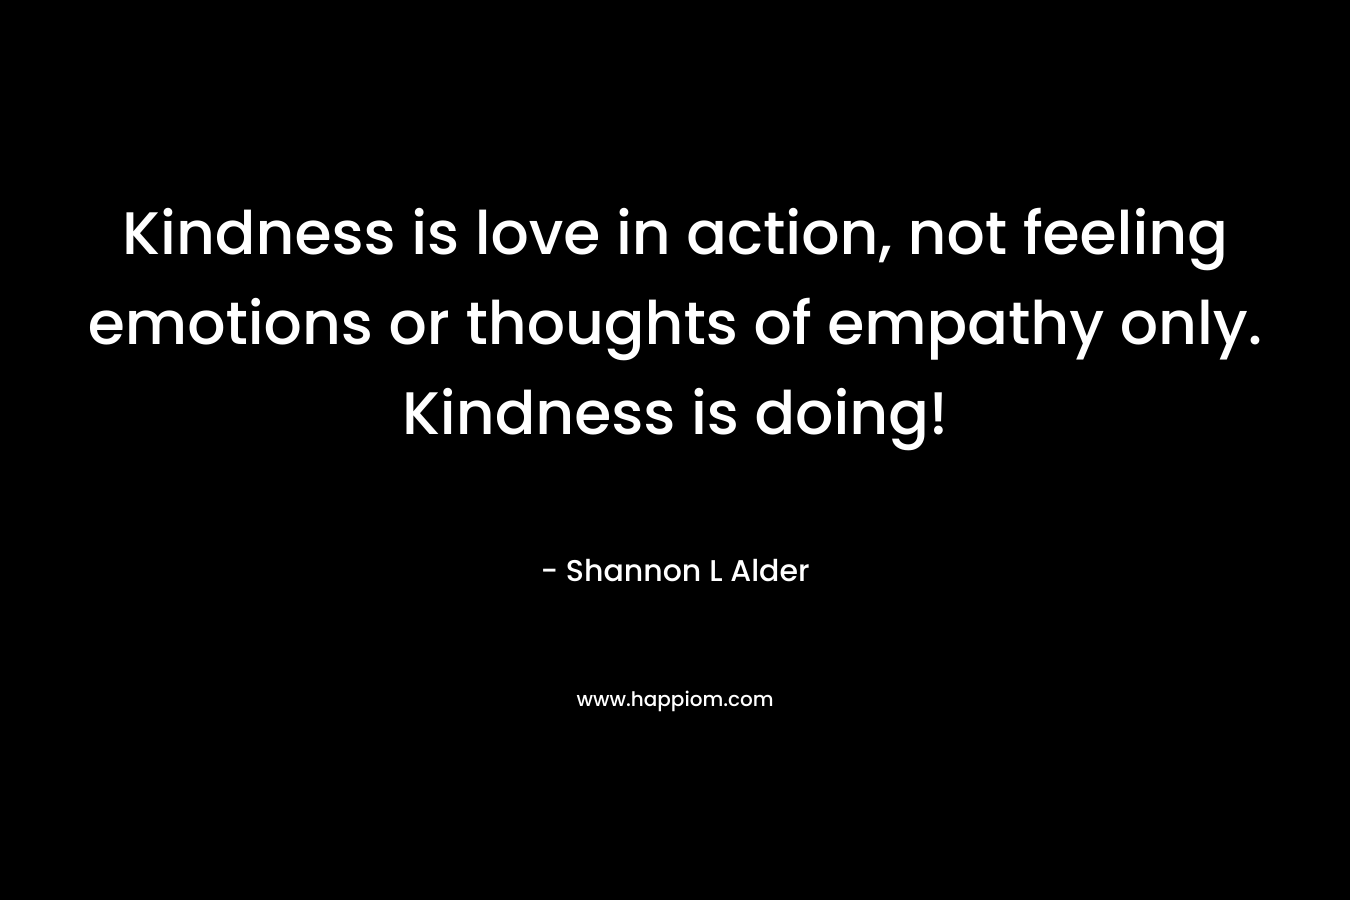 Kindness is love in action, not feeling emotions or thoughts of empathy only. Kindness is doing!